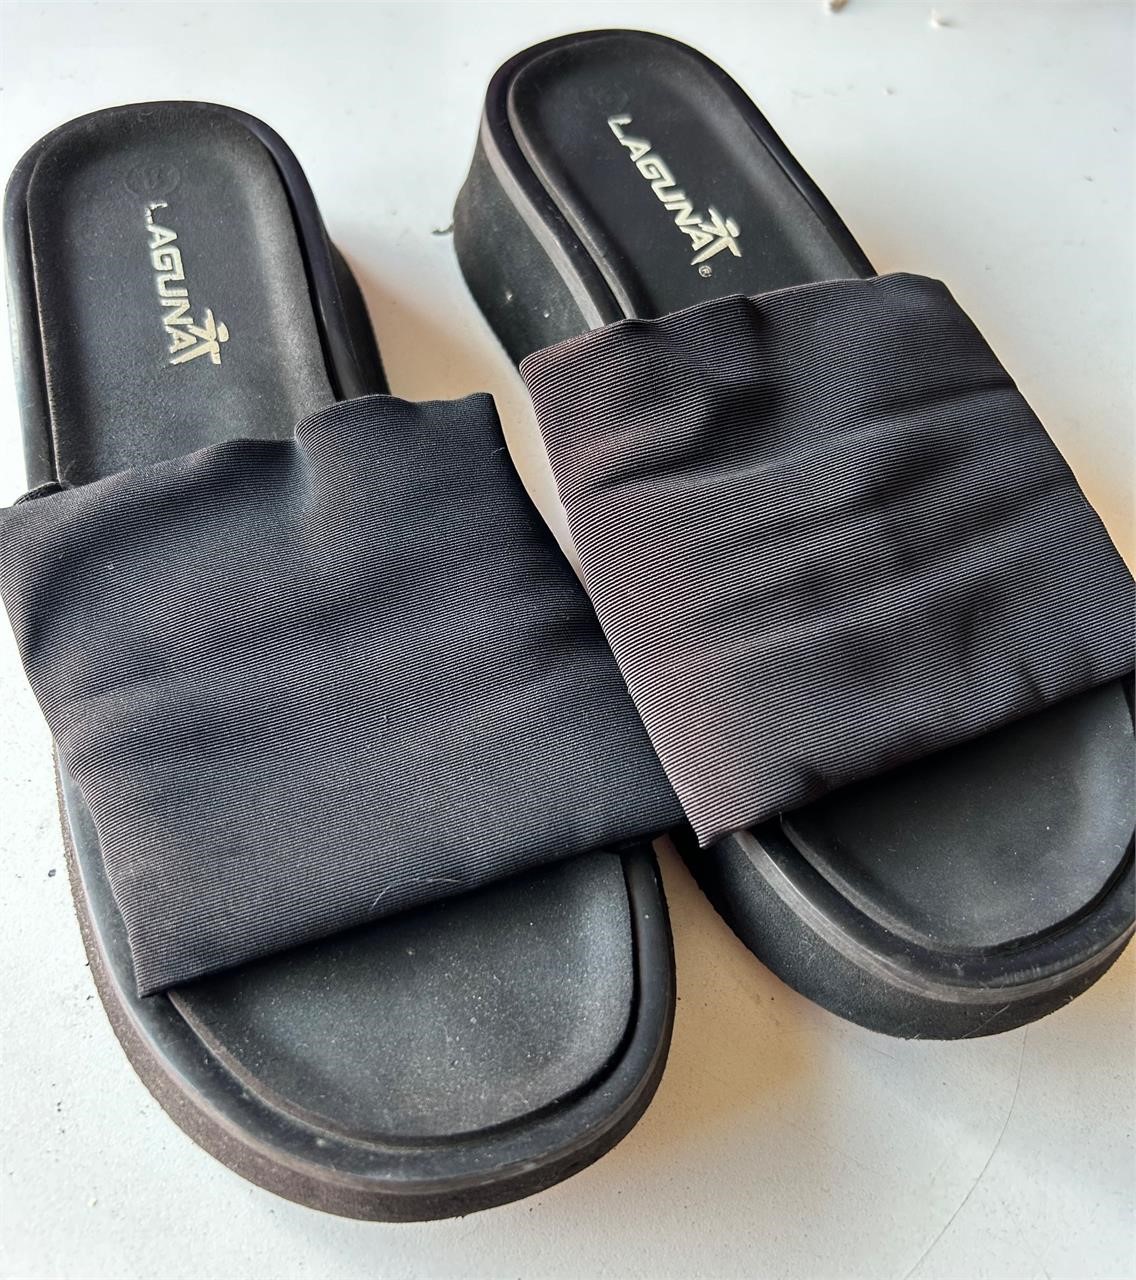 Laguna Sandals and Bare Traps shoes (size 81/2)